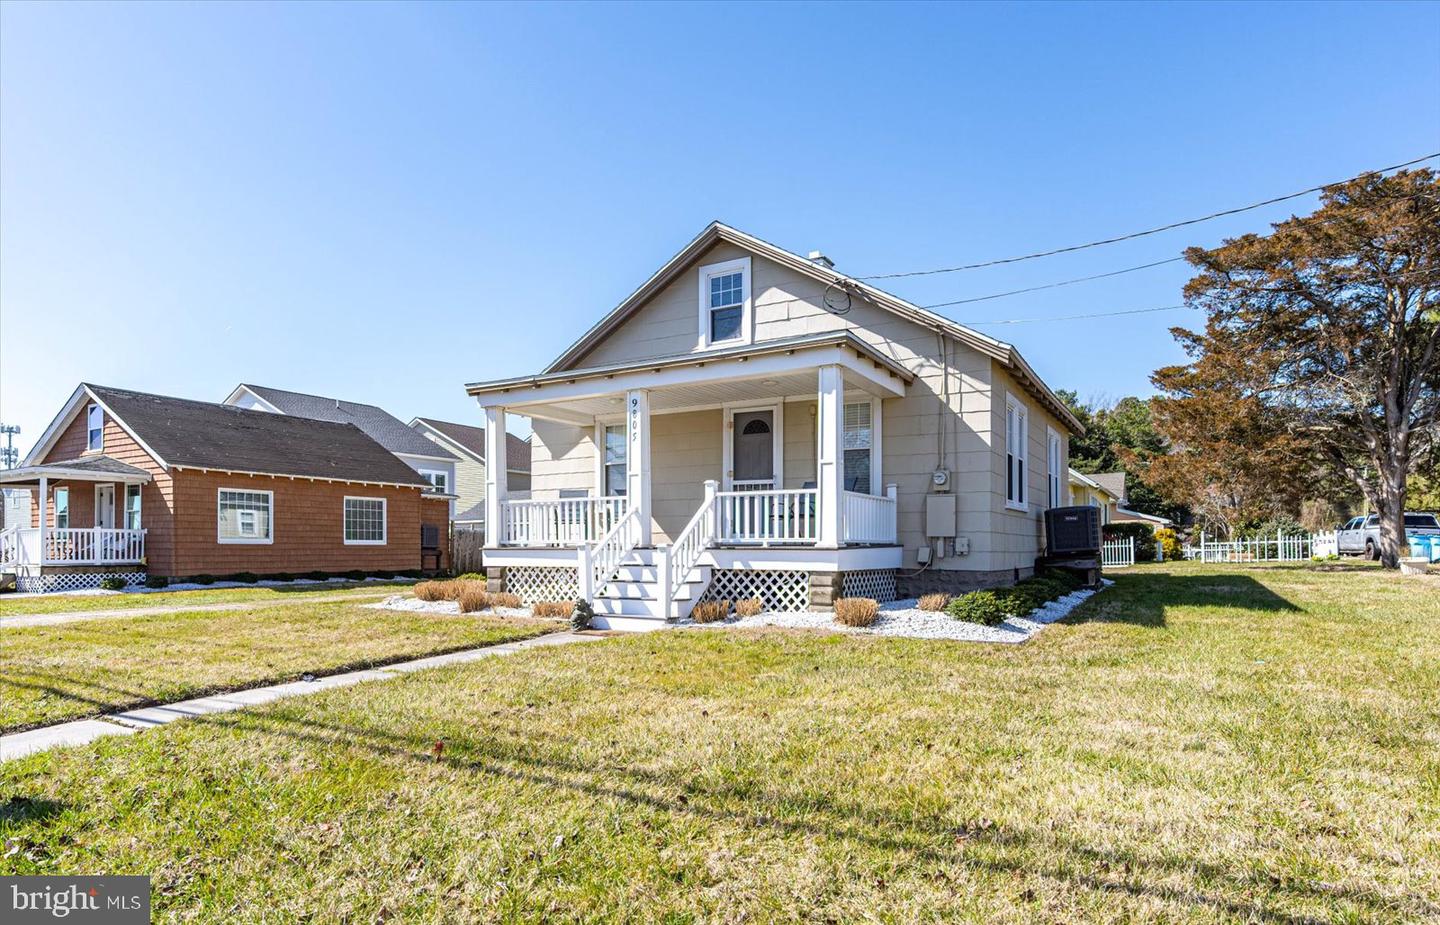 MDWO2019110-802902594128-2024-03-05-14-03-41 9801/9805 Golf Course Rd | Ocean City, MD Real Estate For Sale | MLS# Mdwo2019110  - 1st Choice Properties